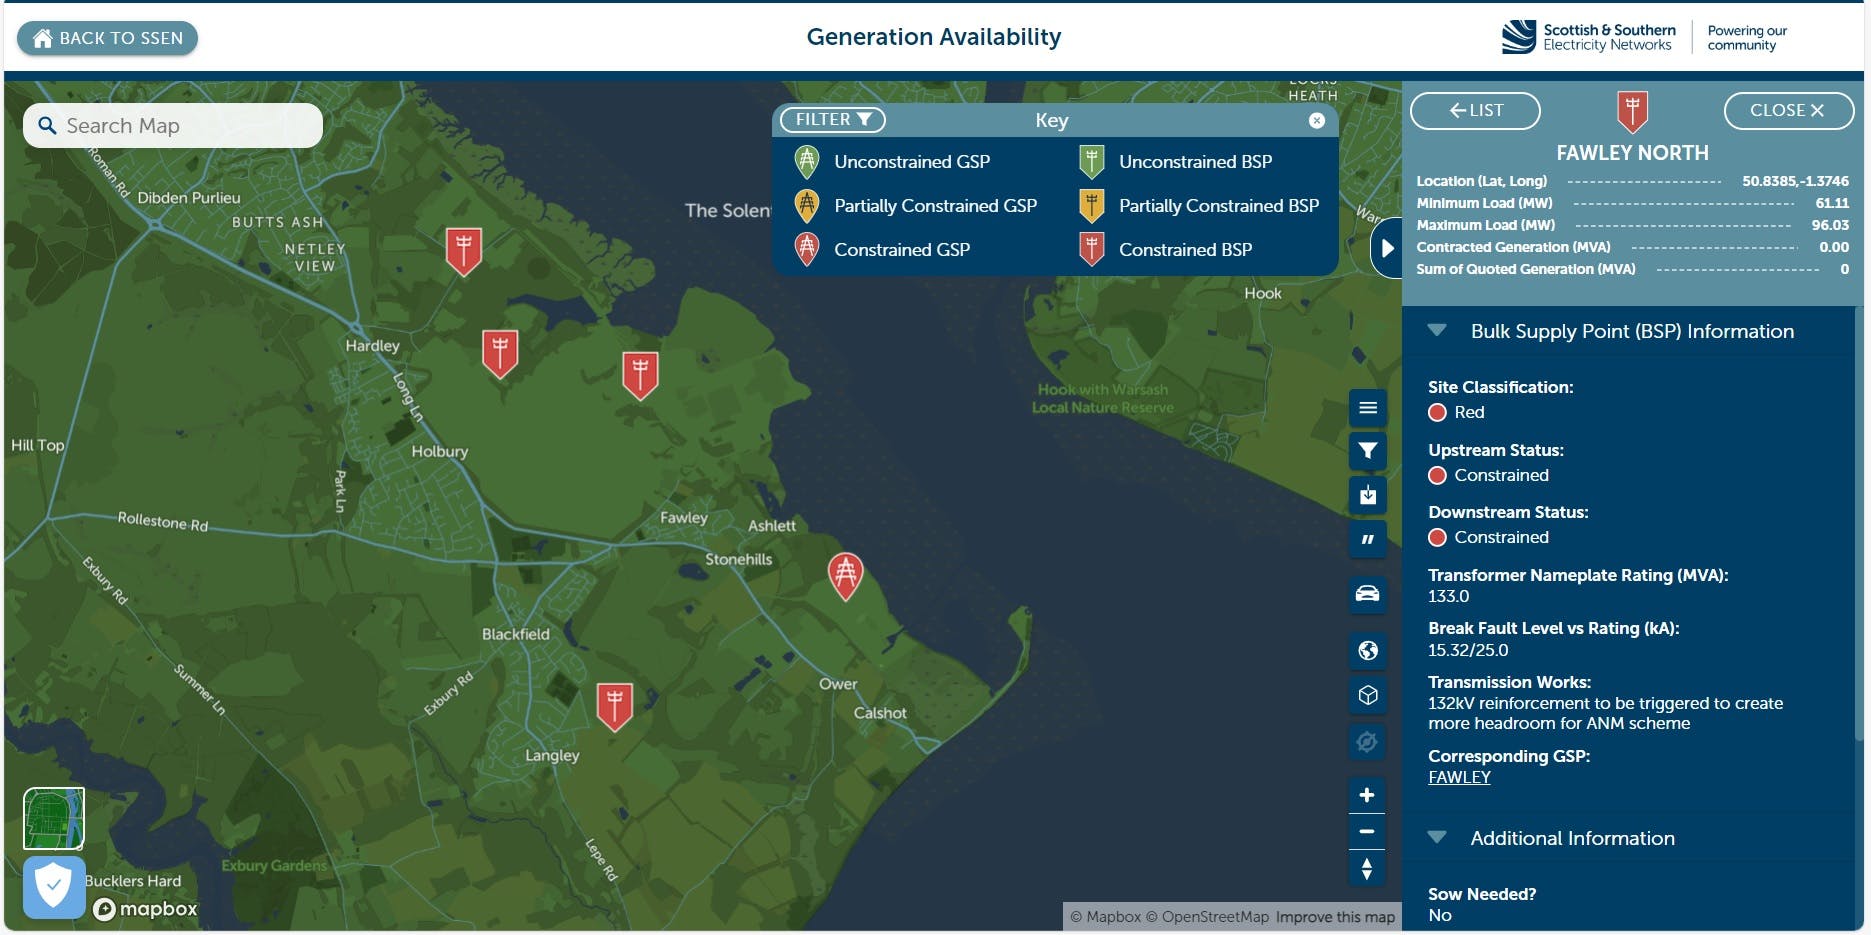 Generation and Network Availability Maps